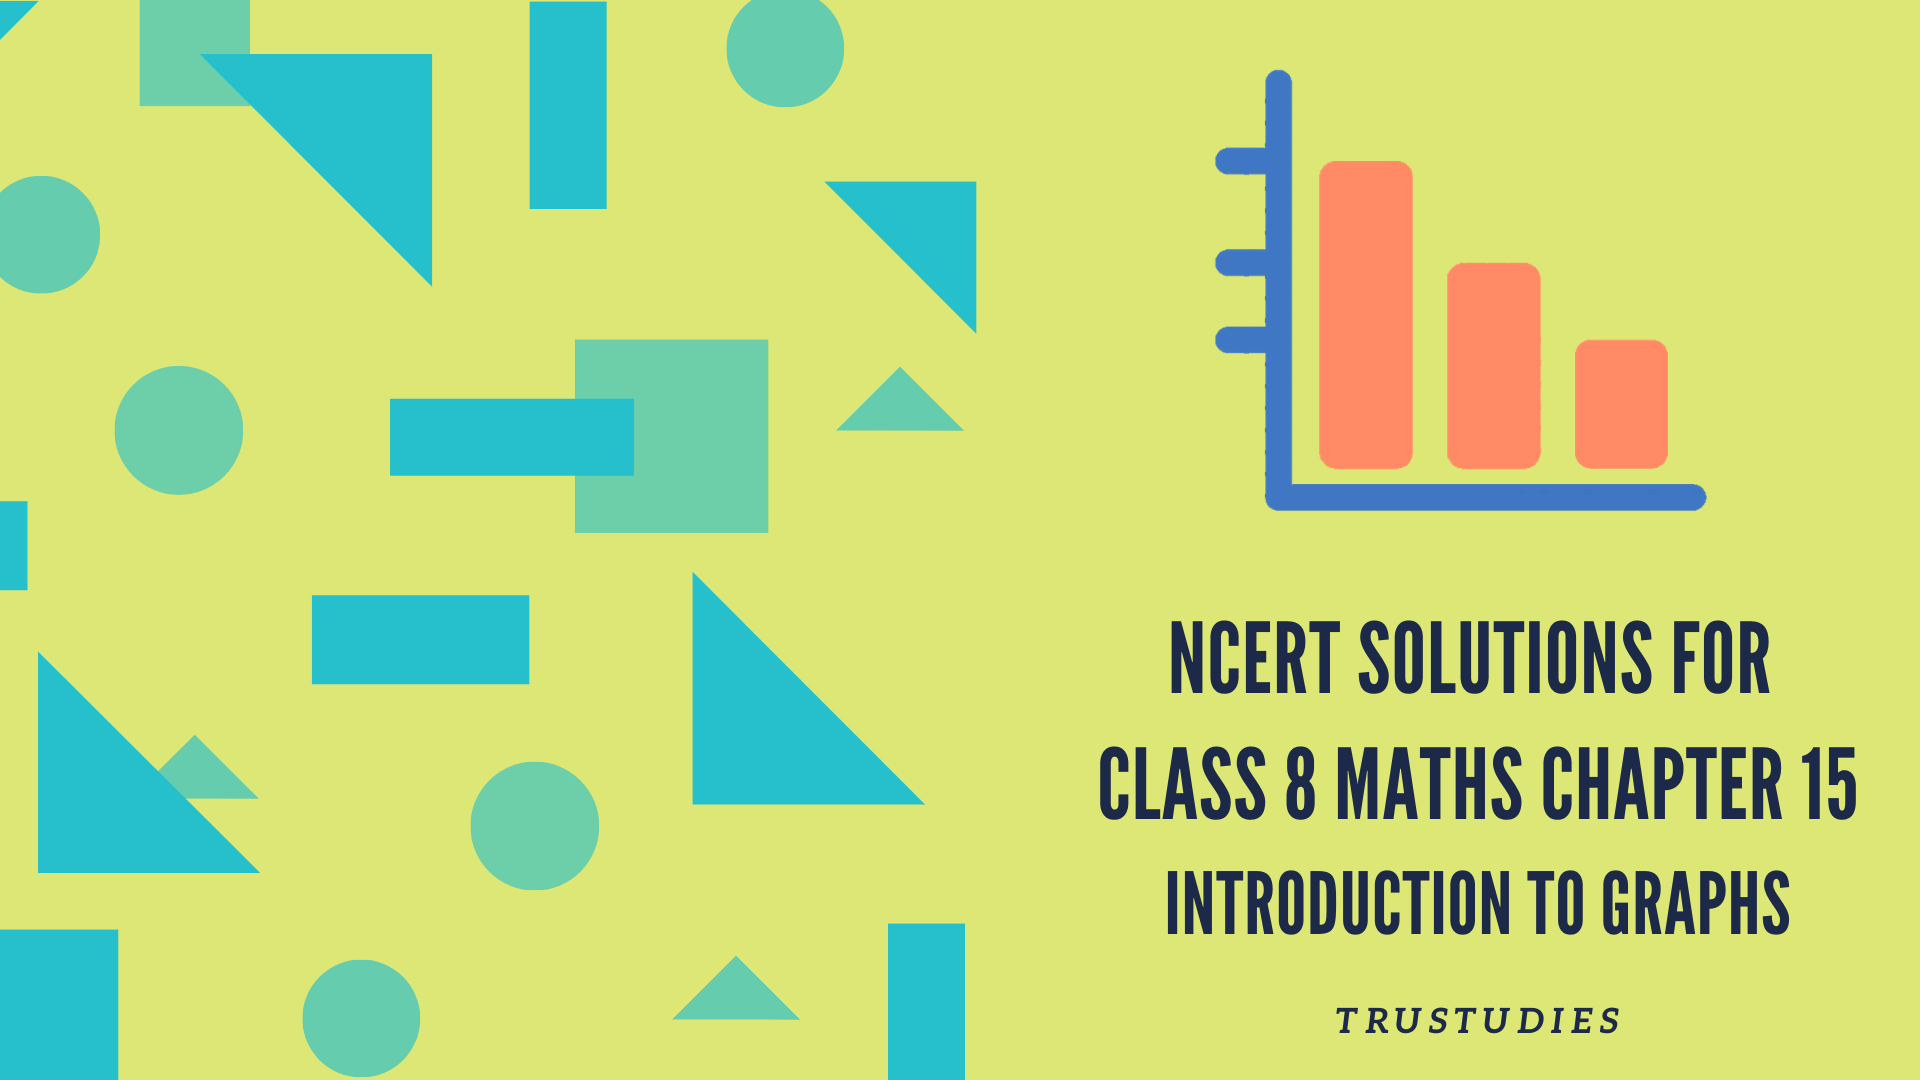 NCERT solutions for class 8 maths chapter 15 introduction to graphs banner image